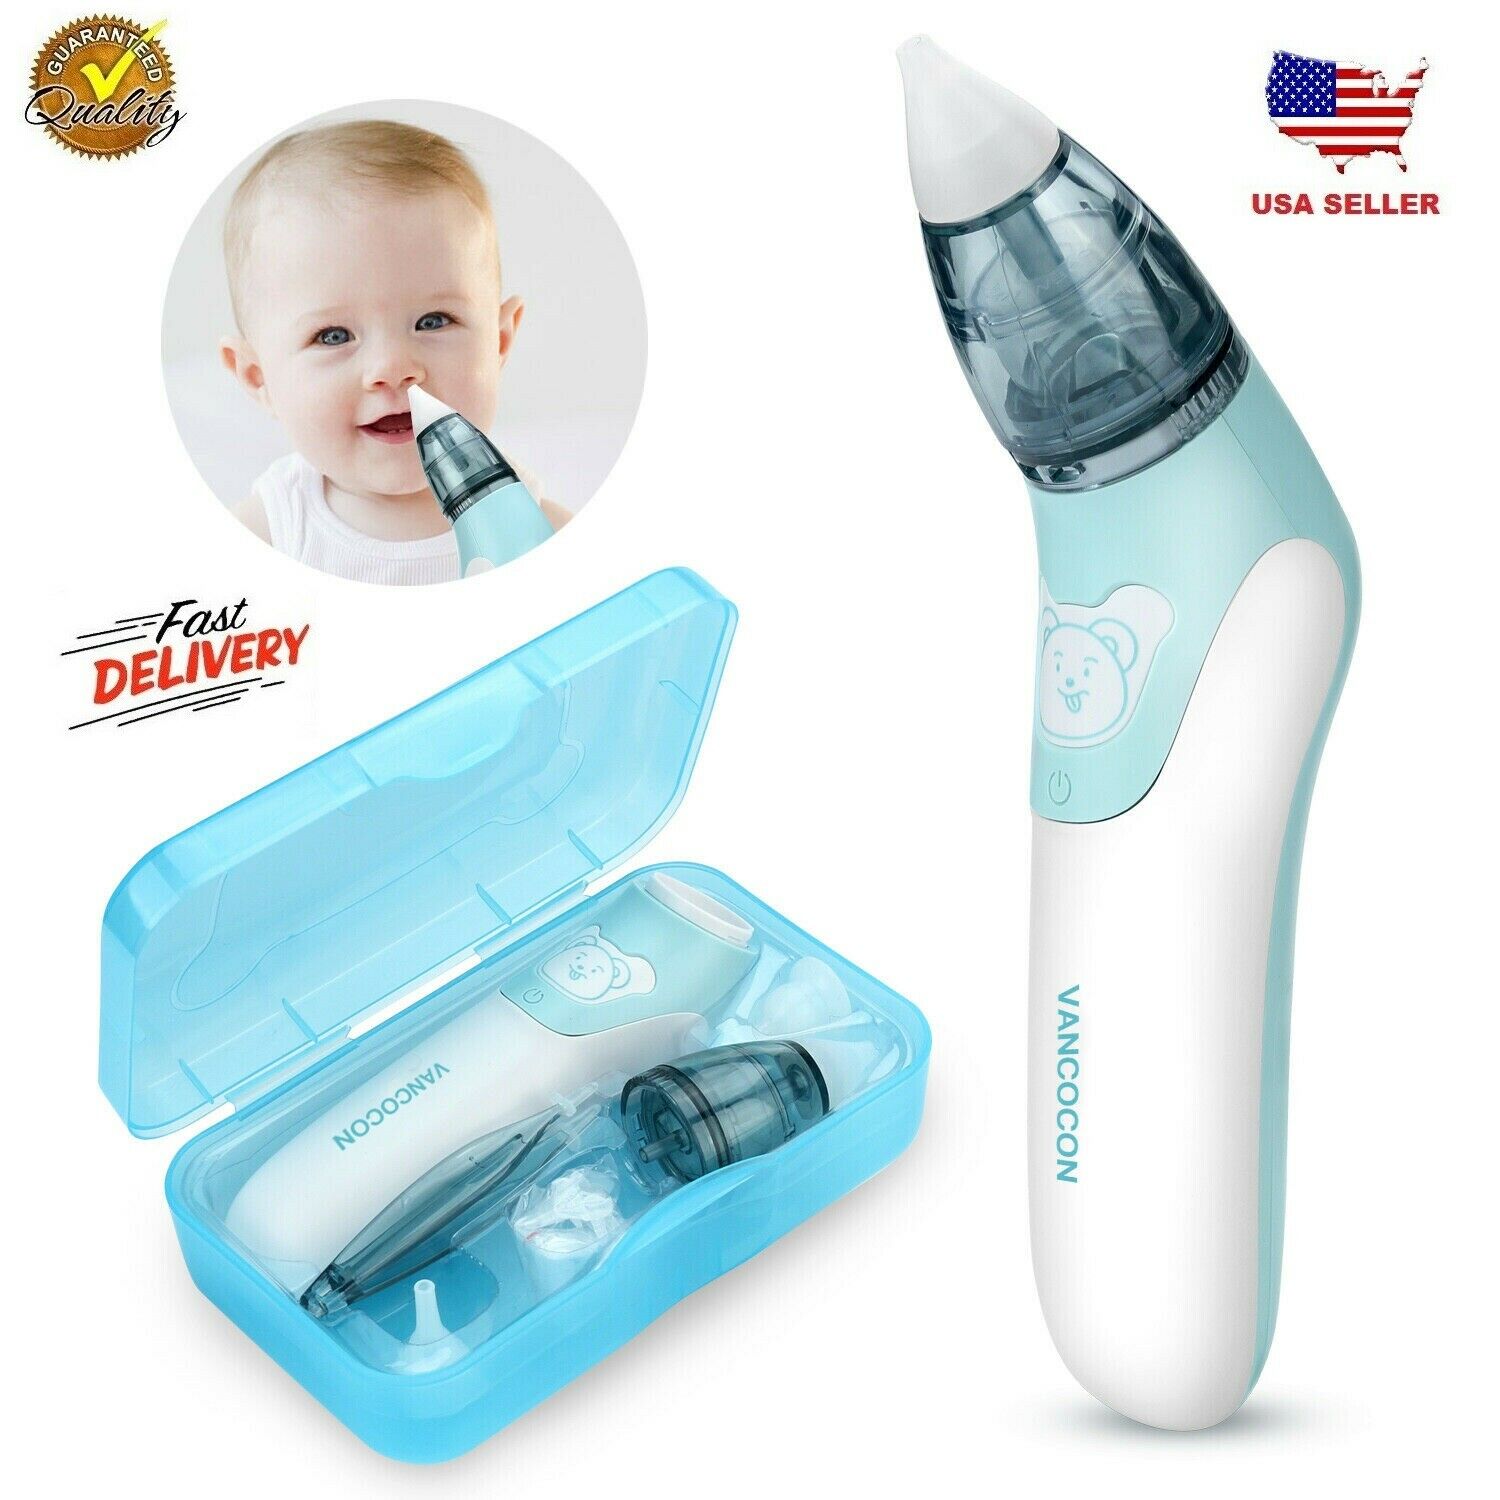 Baby Nasal Aspirator Electric Nose Cleaner Safe Hygienic Nostril W/ 3snot Sucker